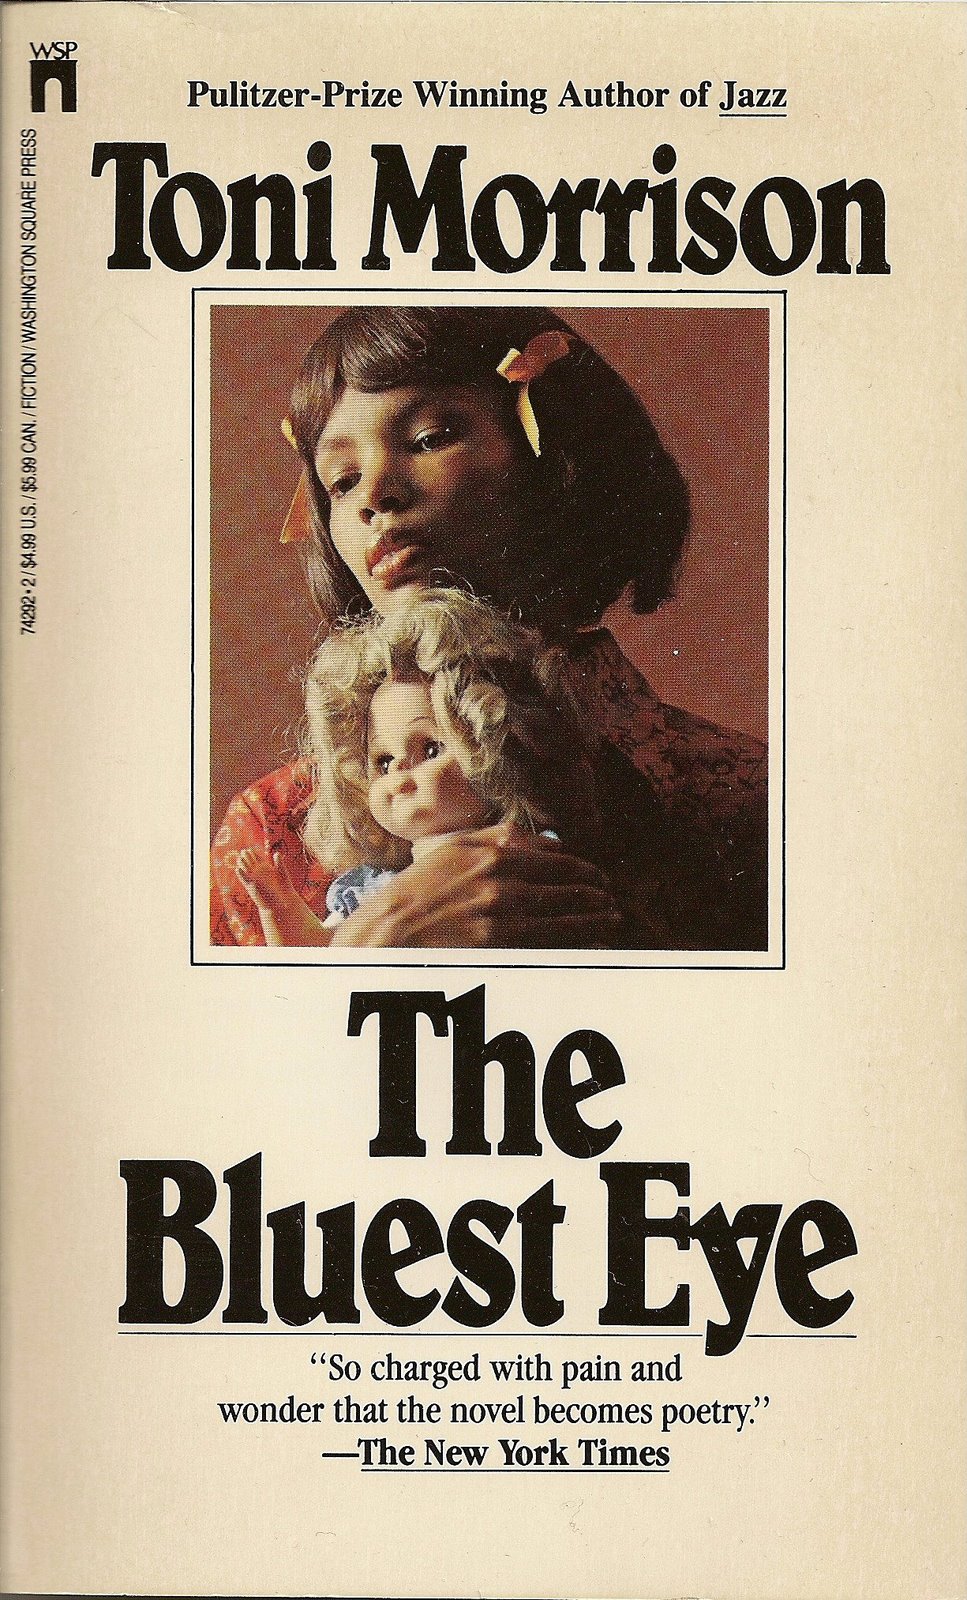 "The Bluest Eye turns 50" with Sandy Alexandre